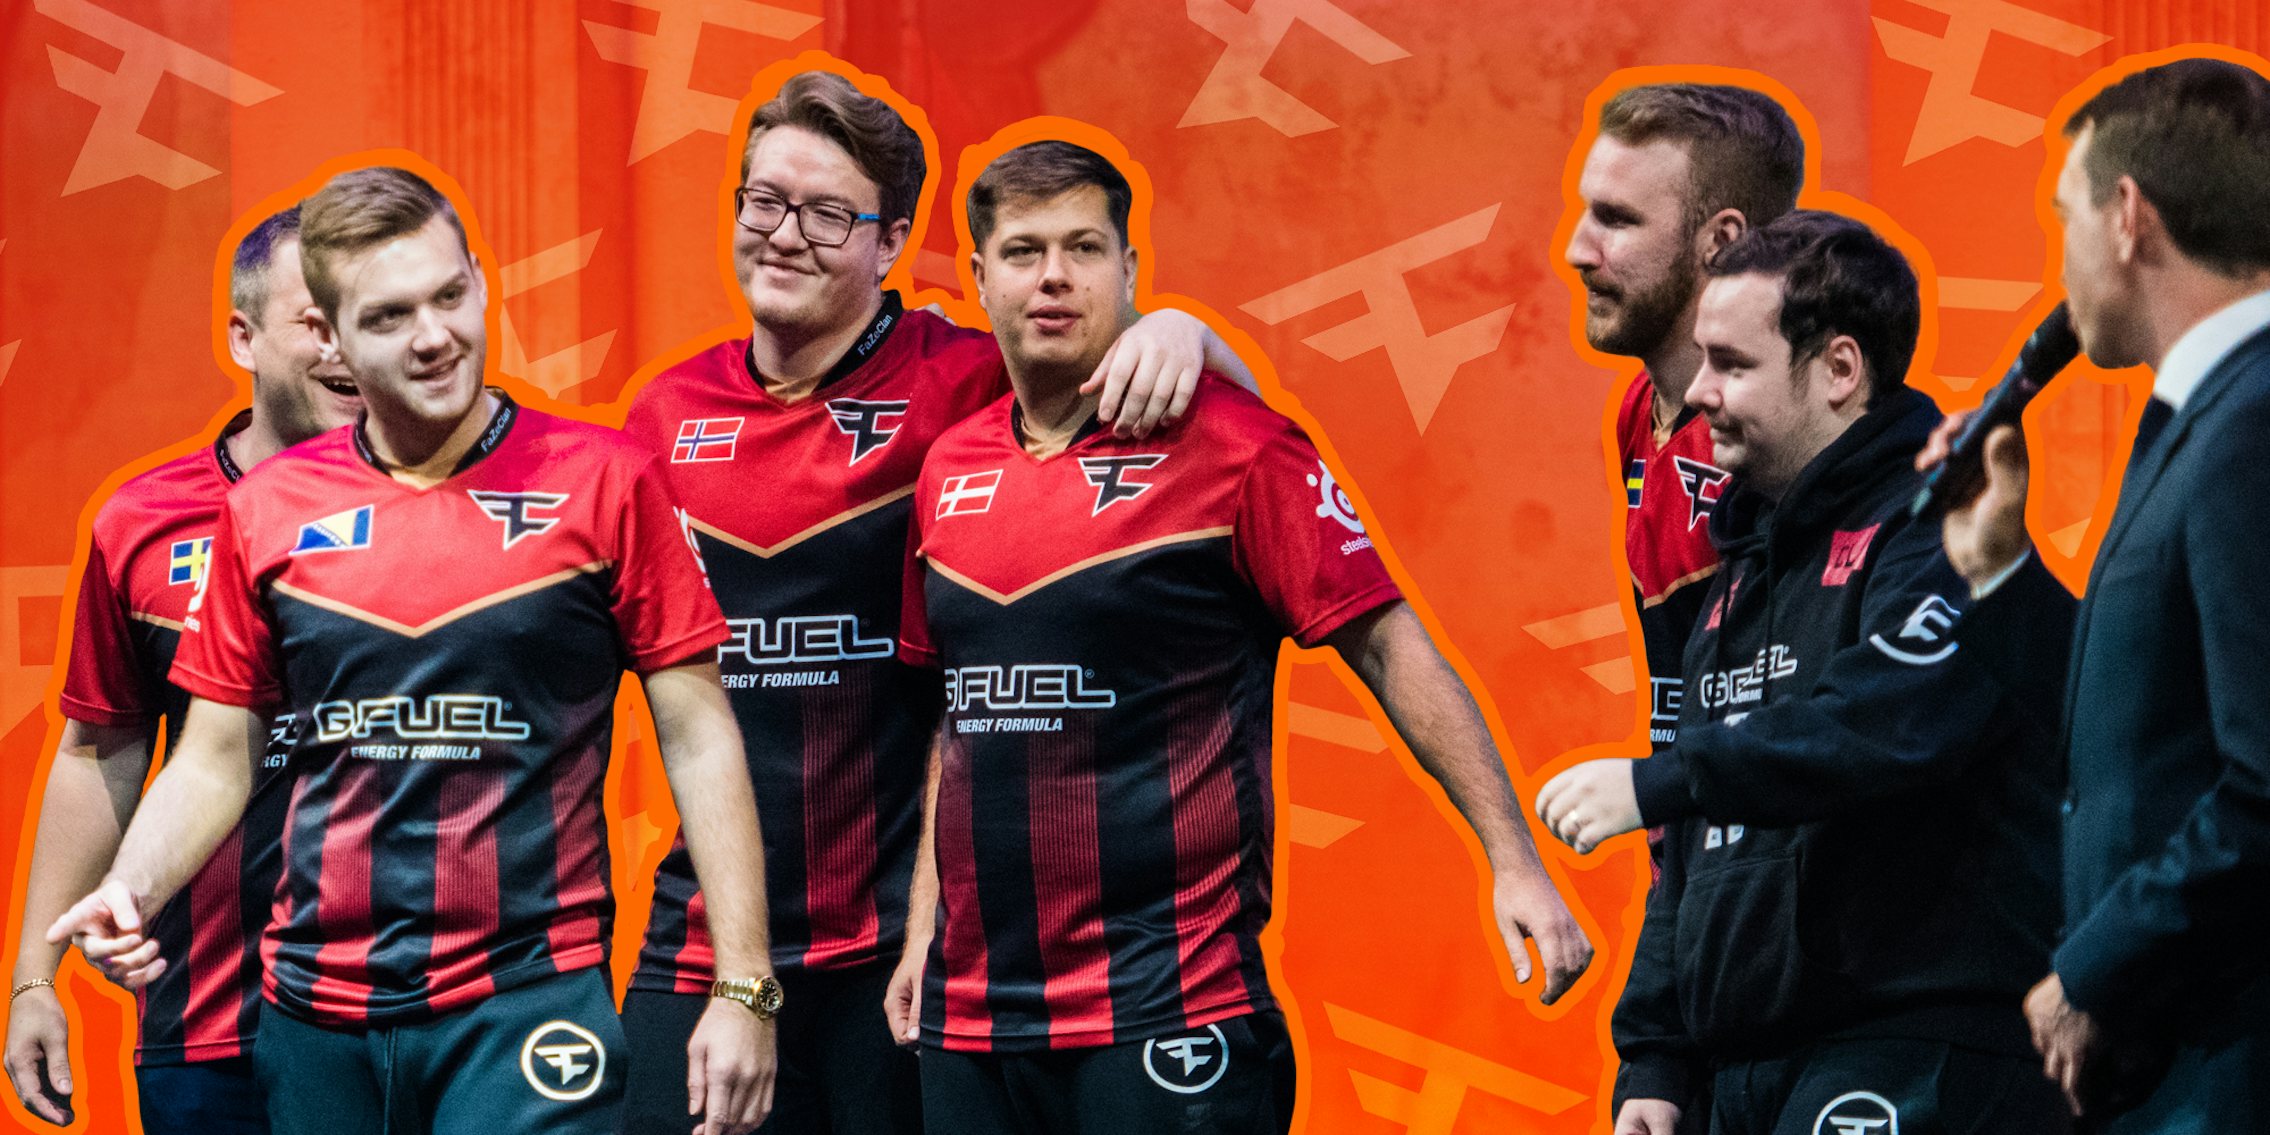 Faze Clan on stage with red to orange vertical Faze Clan logo background Passionfruit remix